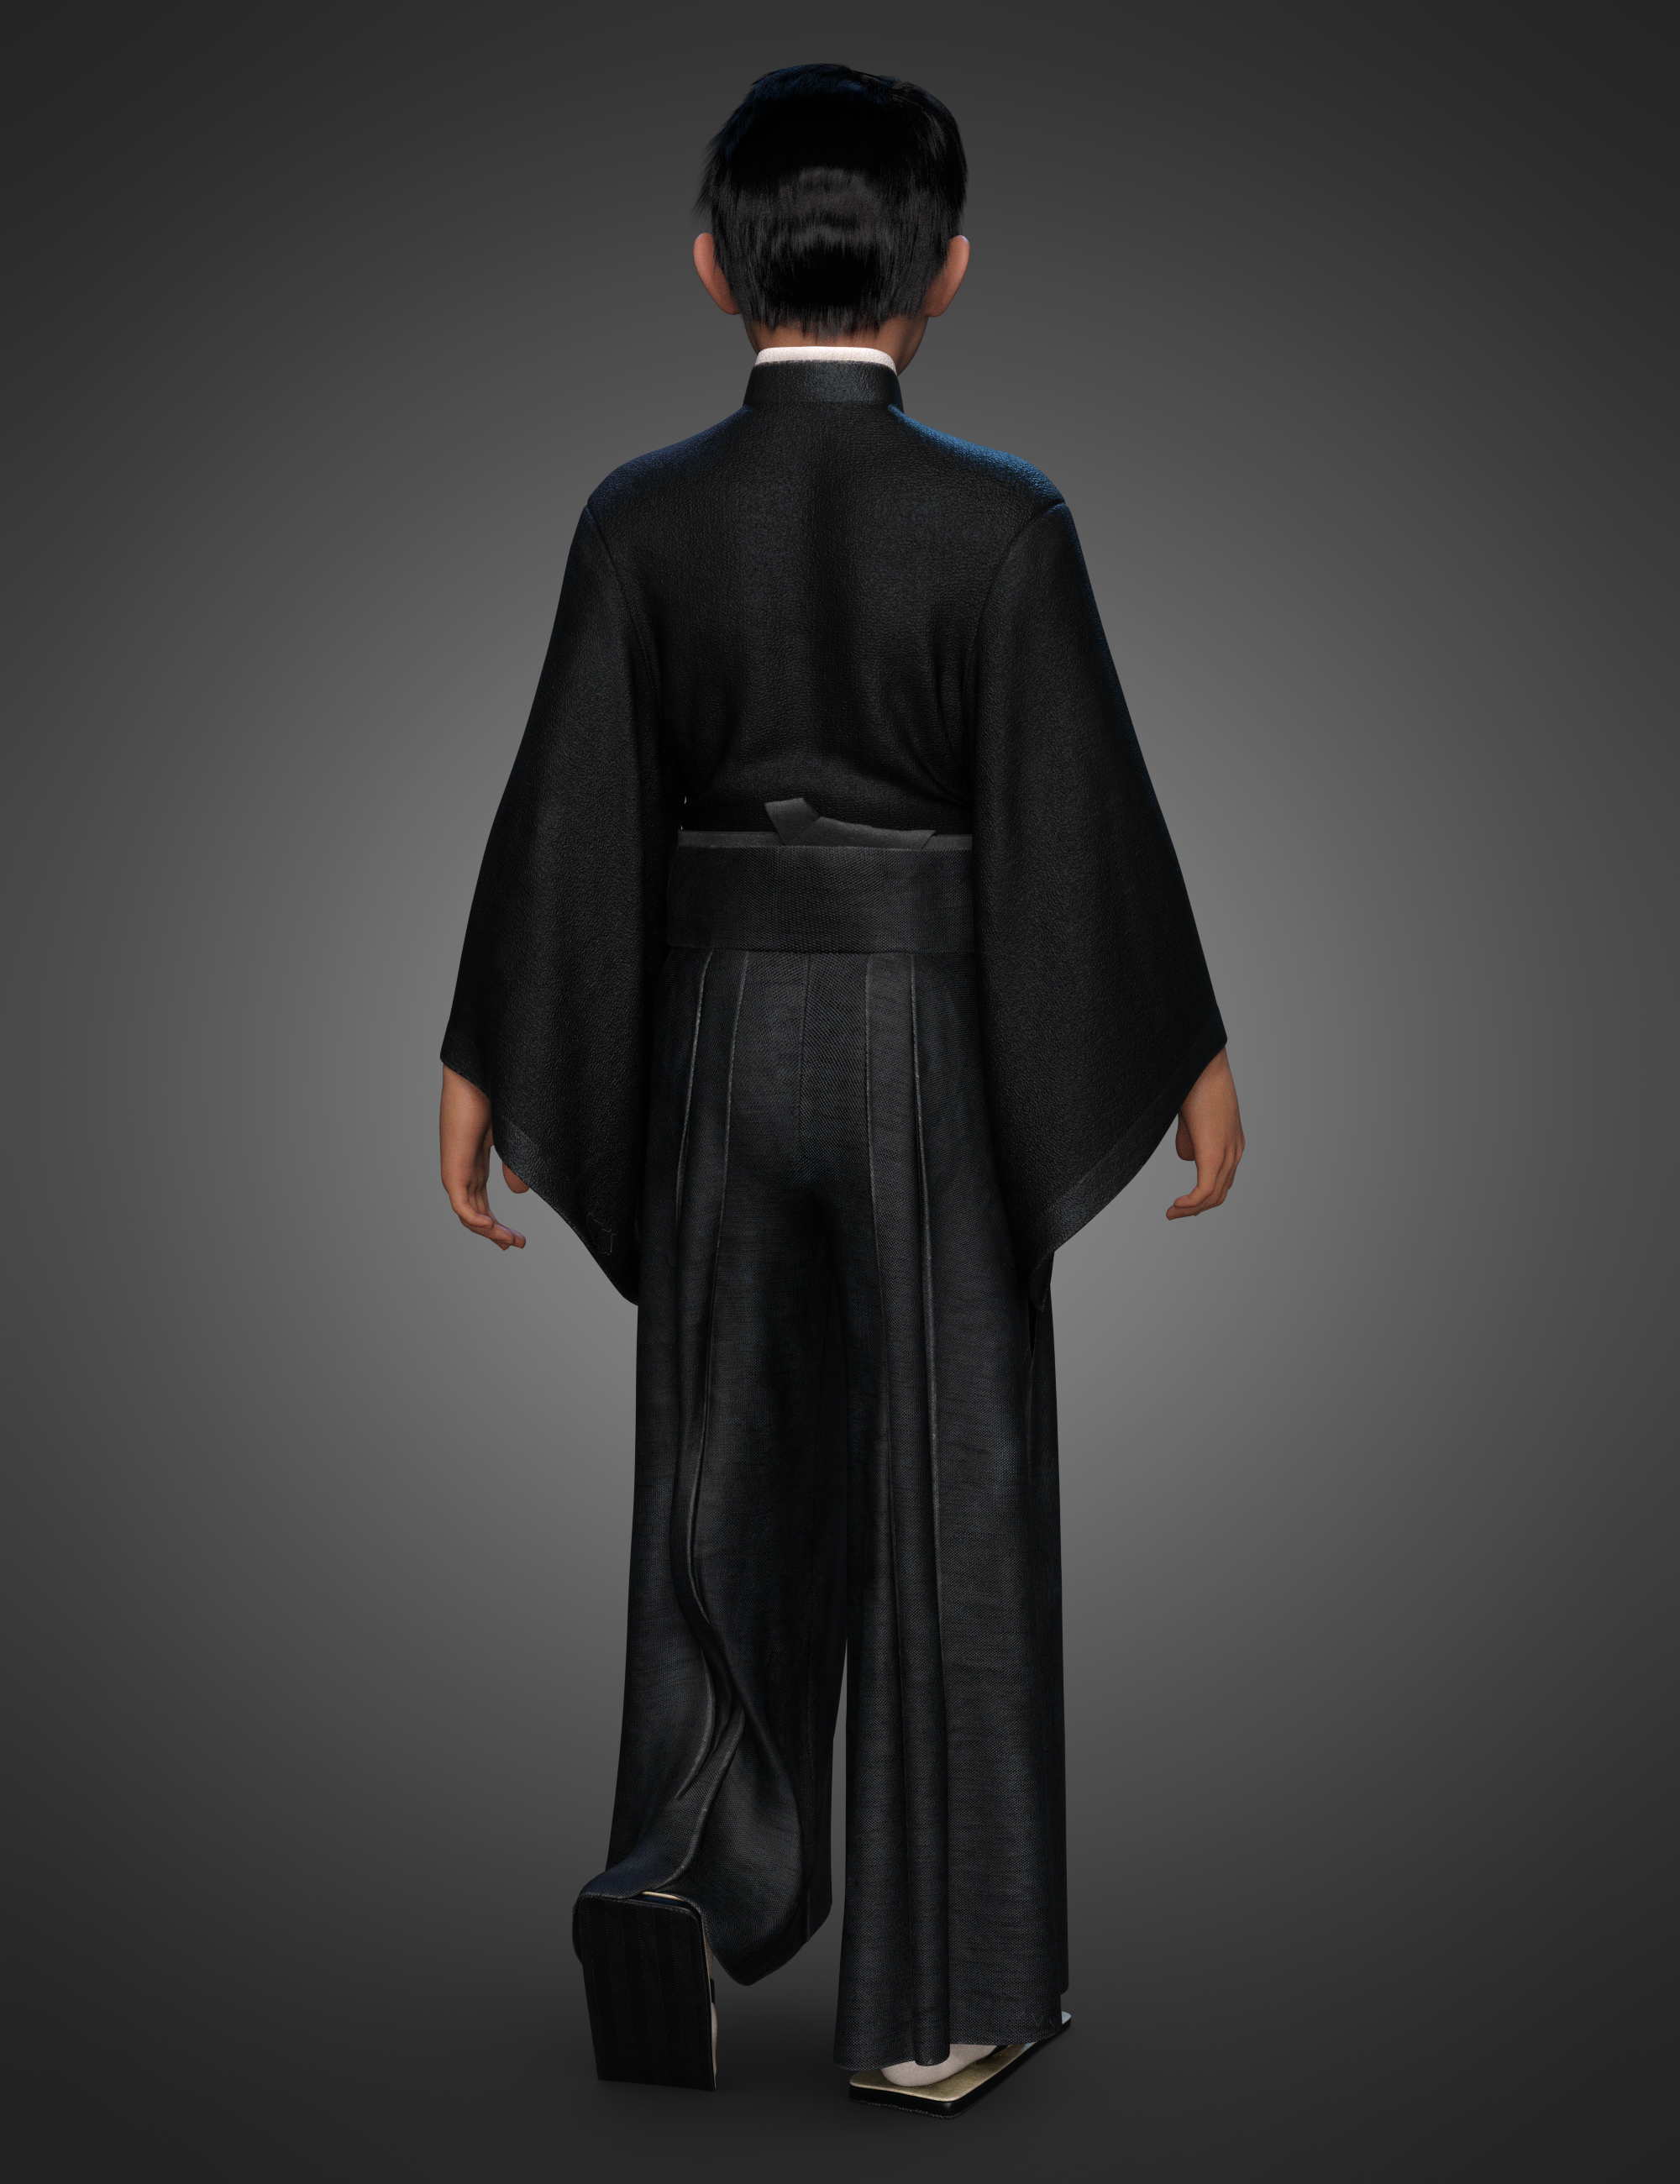 dForce Hakama and Kimono Outfit for Genesis 8.1 Male by: Arki, 3D Models by Daz 3D